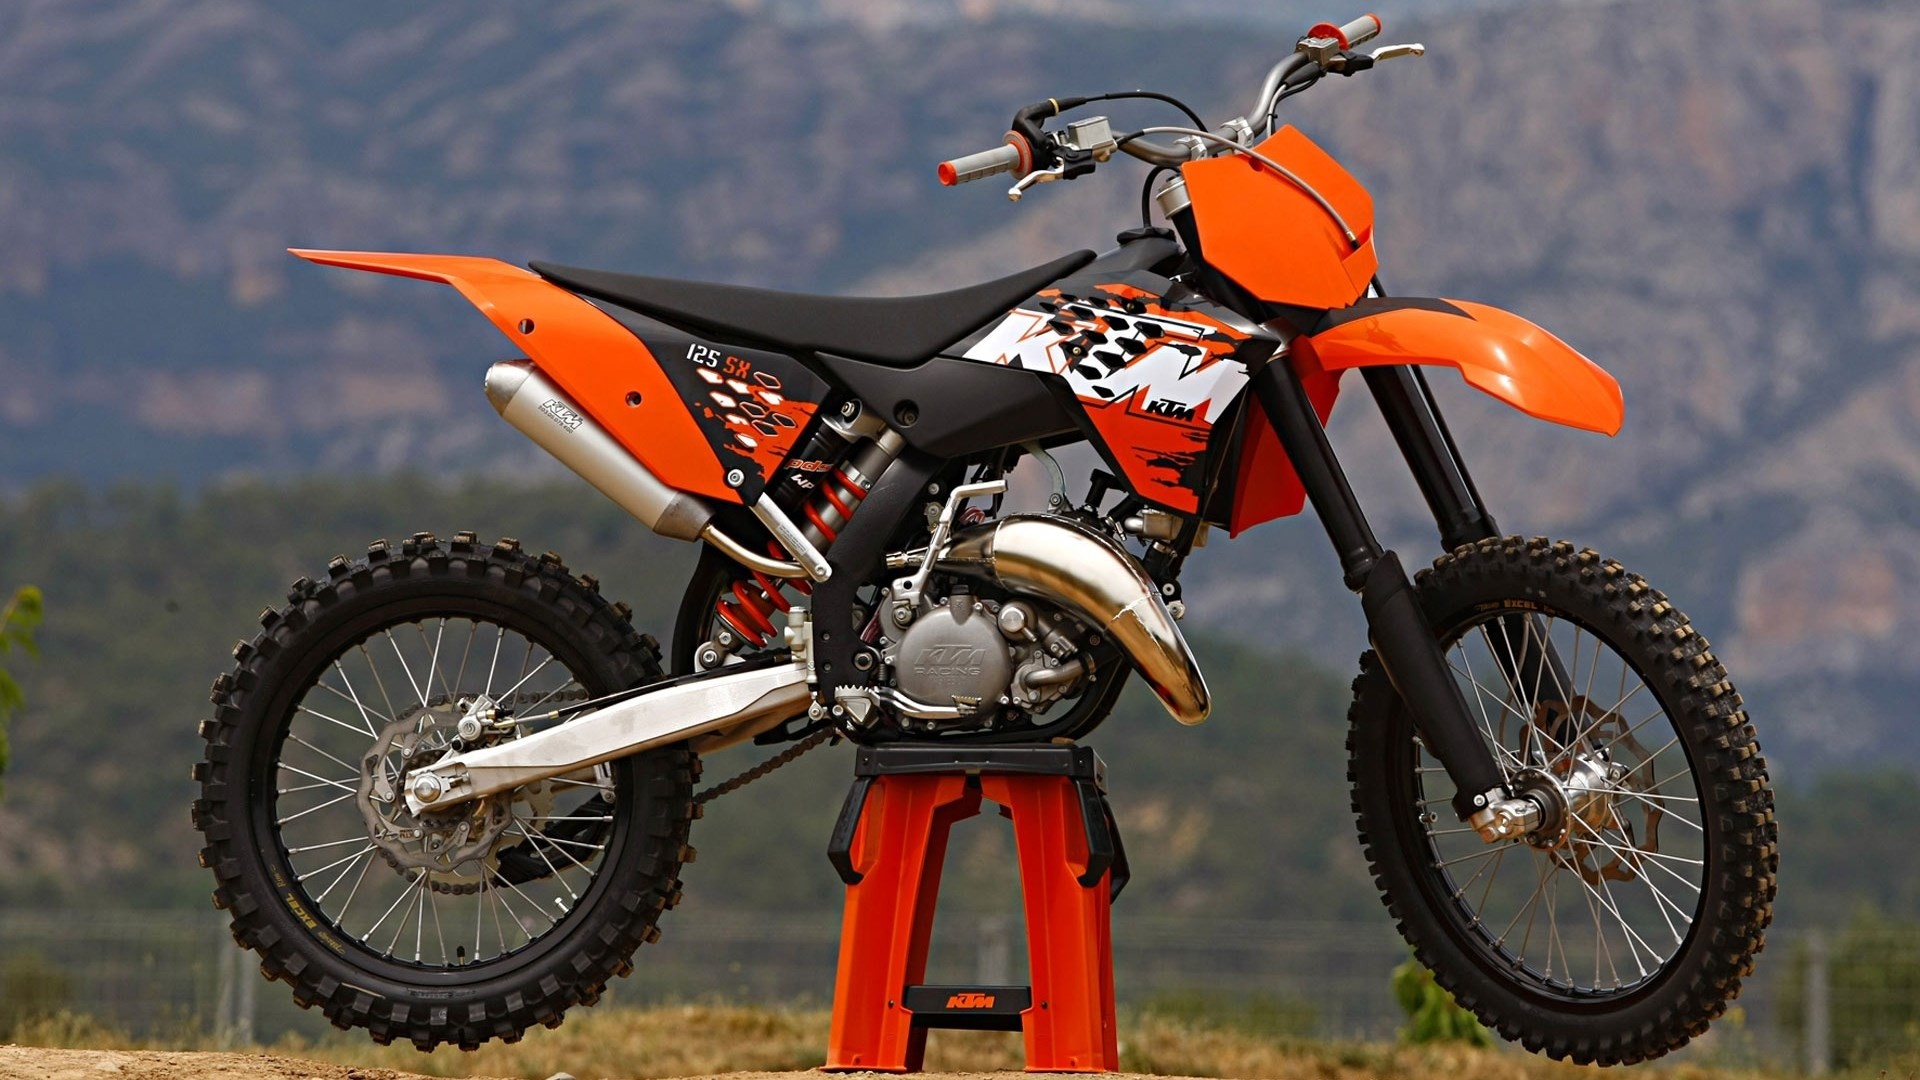 1920x1080 Explore Free Dirt Bikes, Hd Backgrounds, and more! HD Widescreen ktm  wallpaper ...